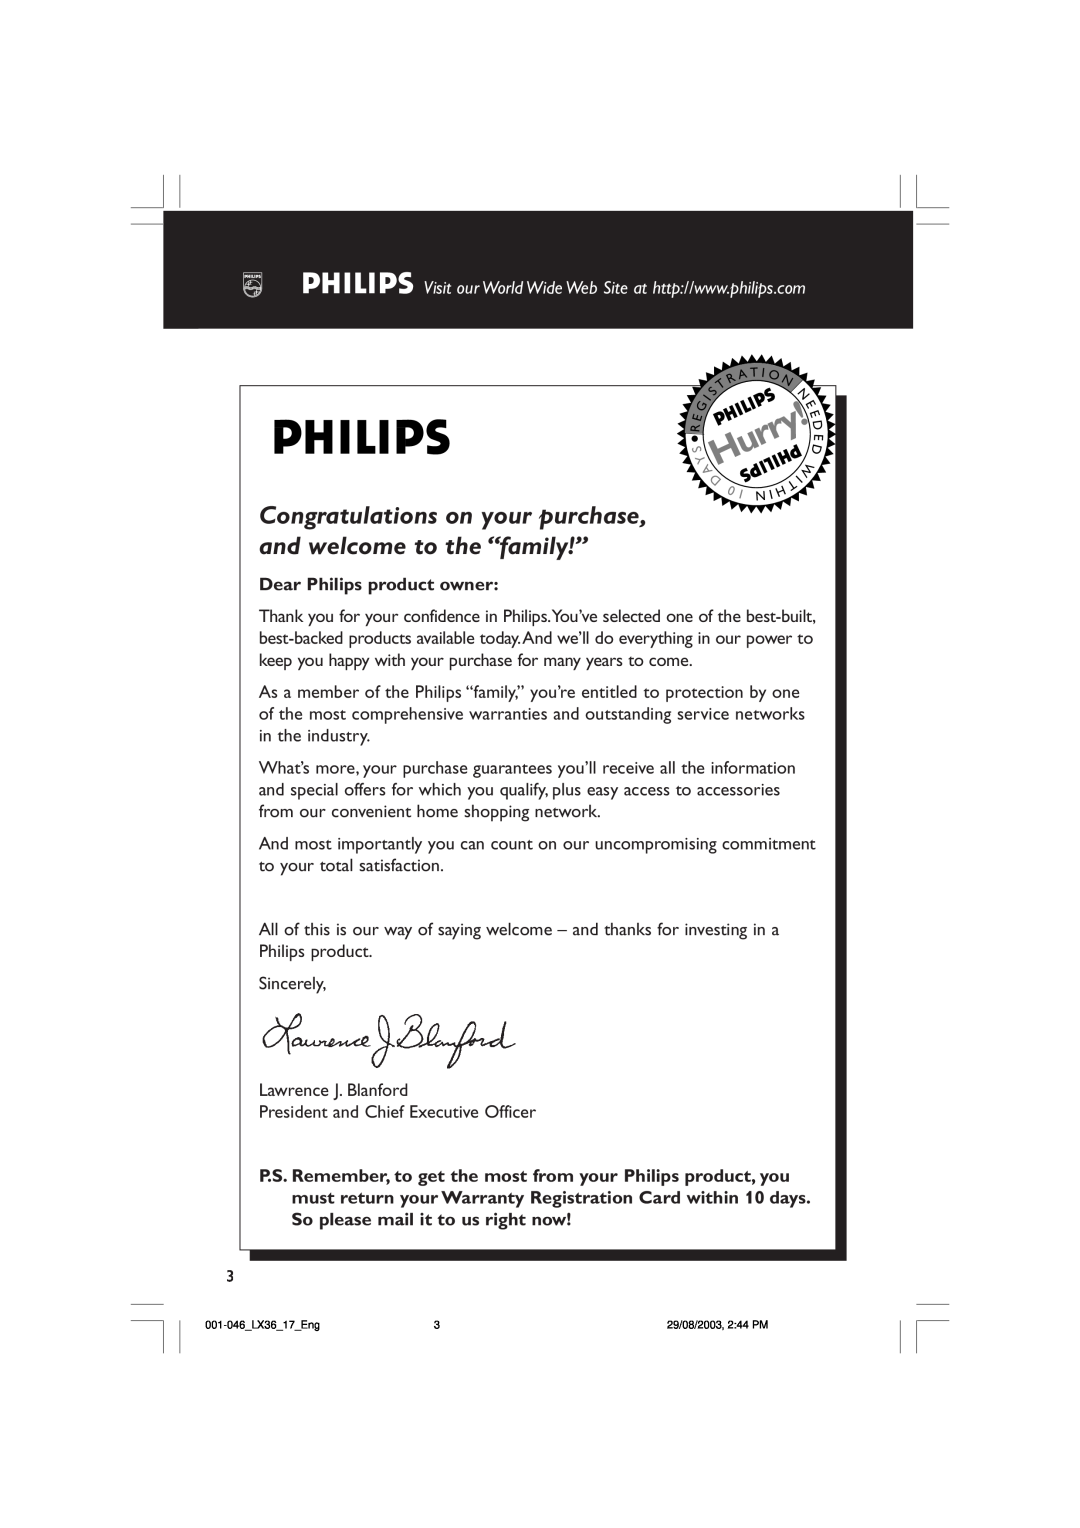 Philips LX3600 warranty Dear Philips product owner, Hurry 